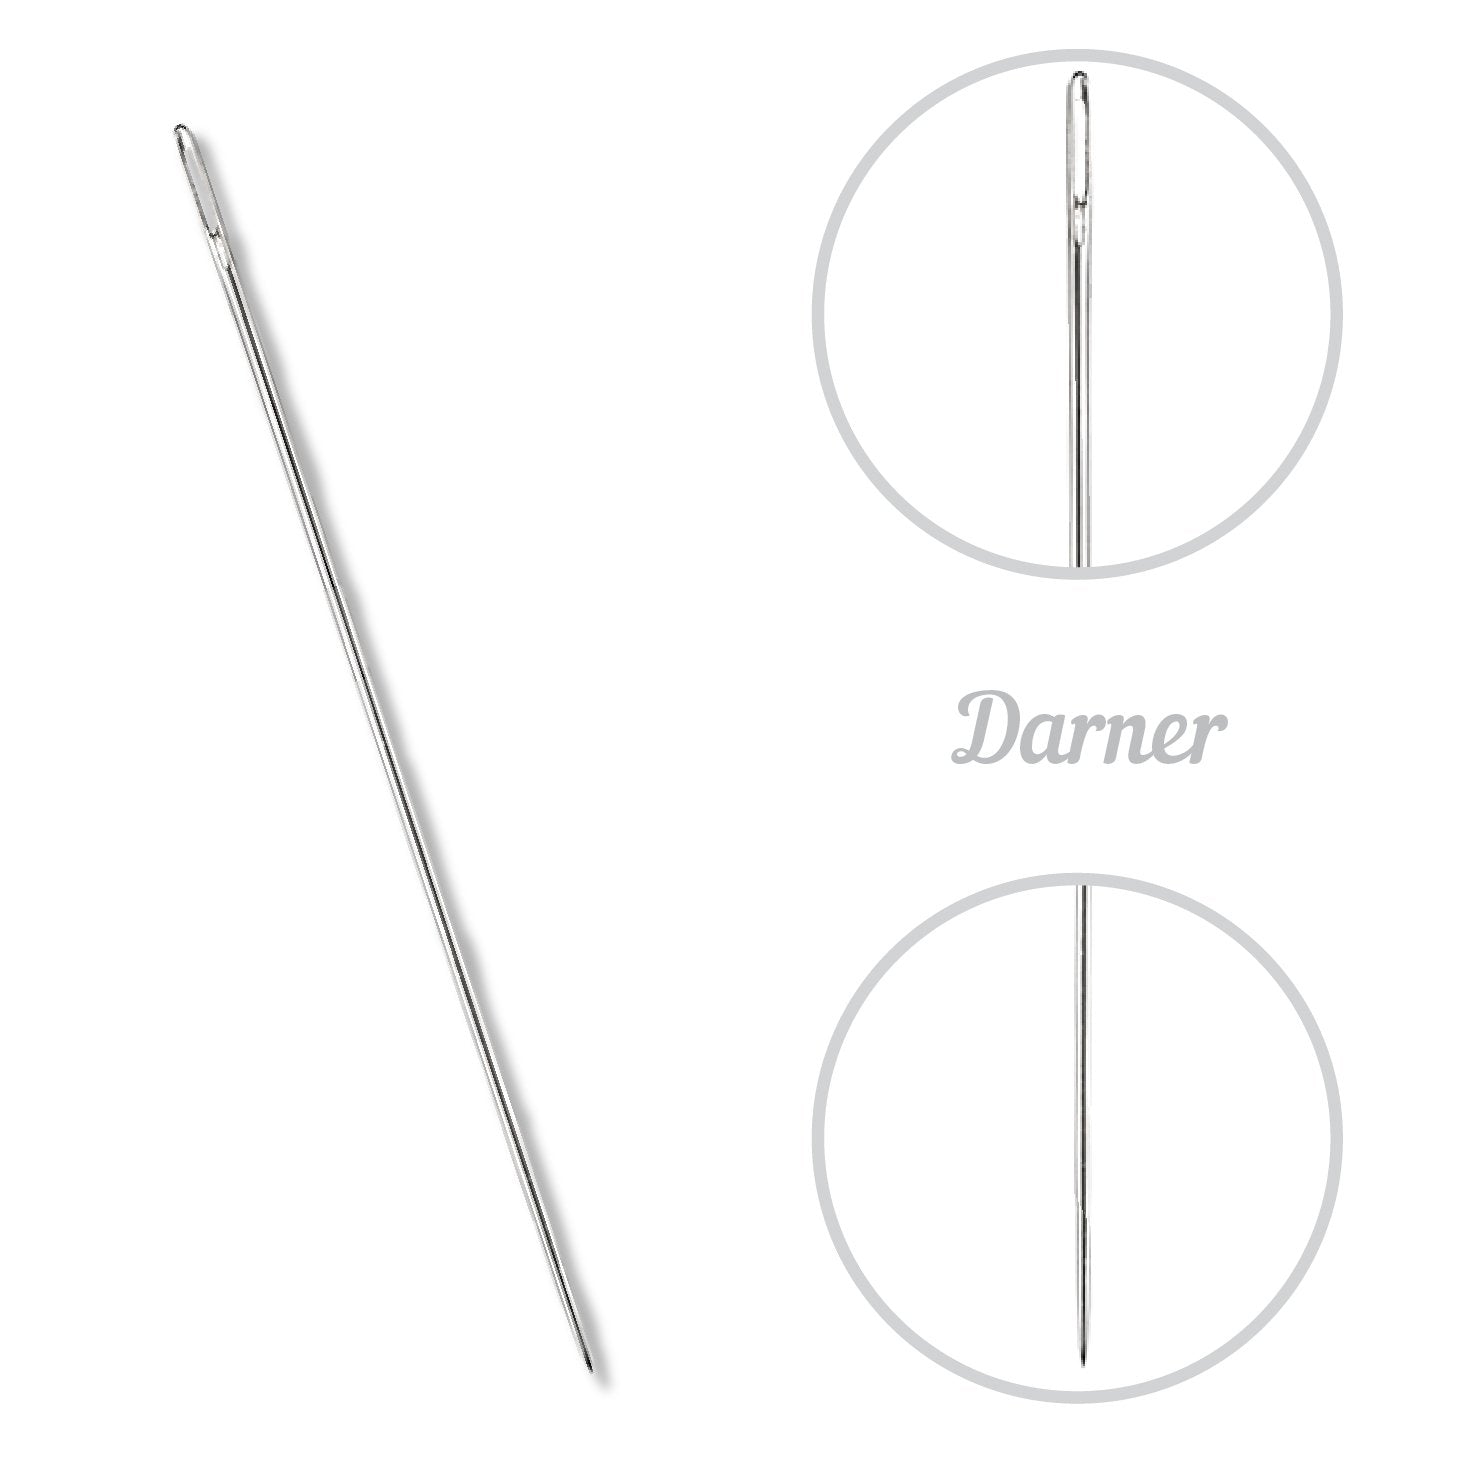 CN - Colonial Needle -Darners - Assortment - #01 - #05-3